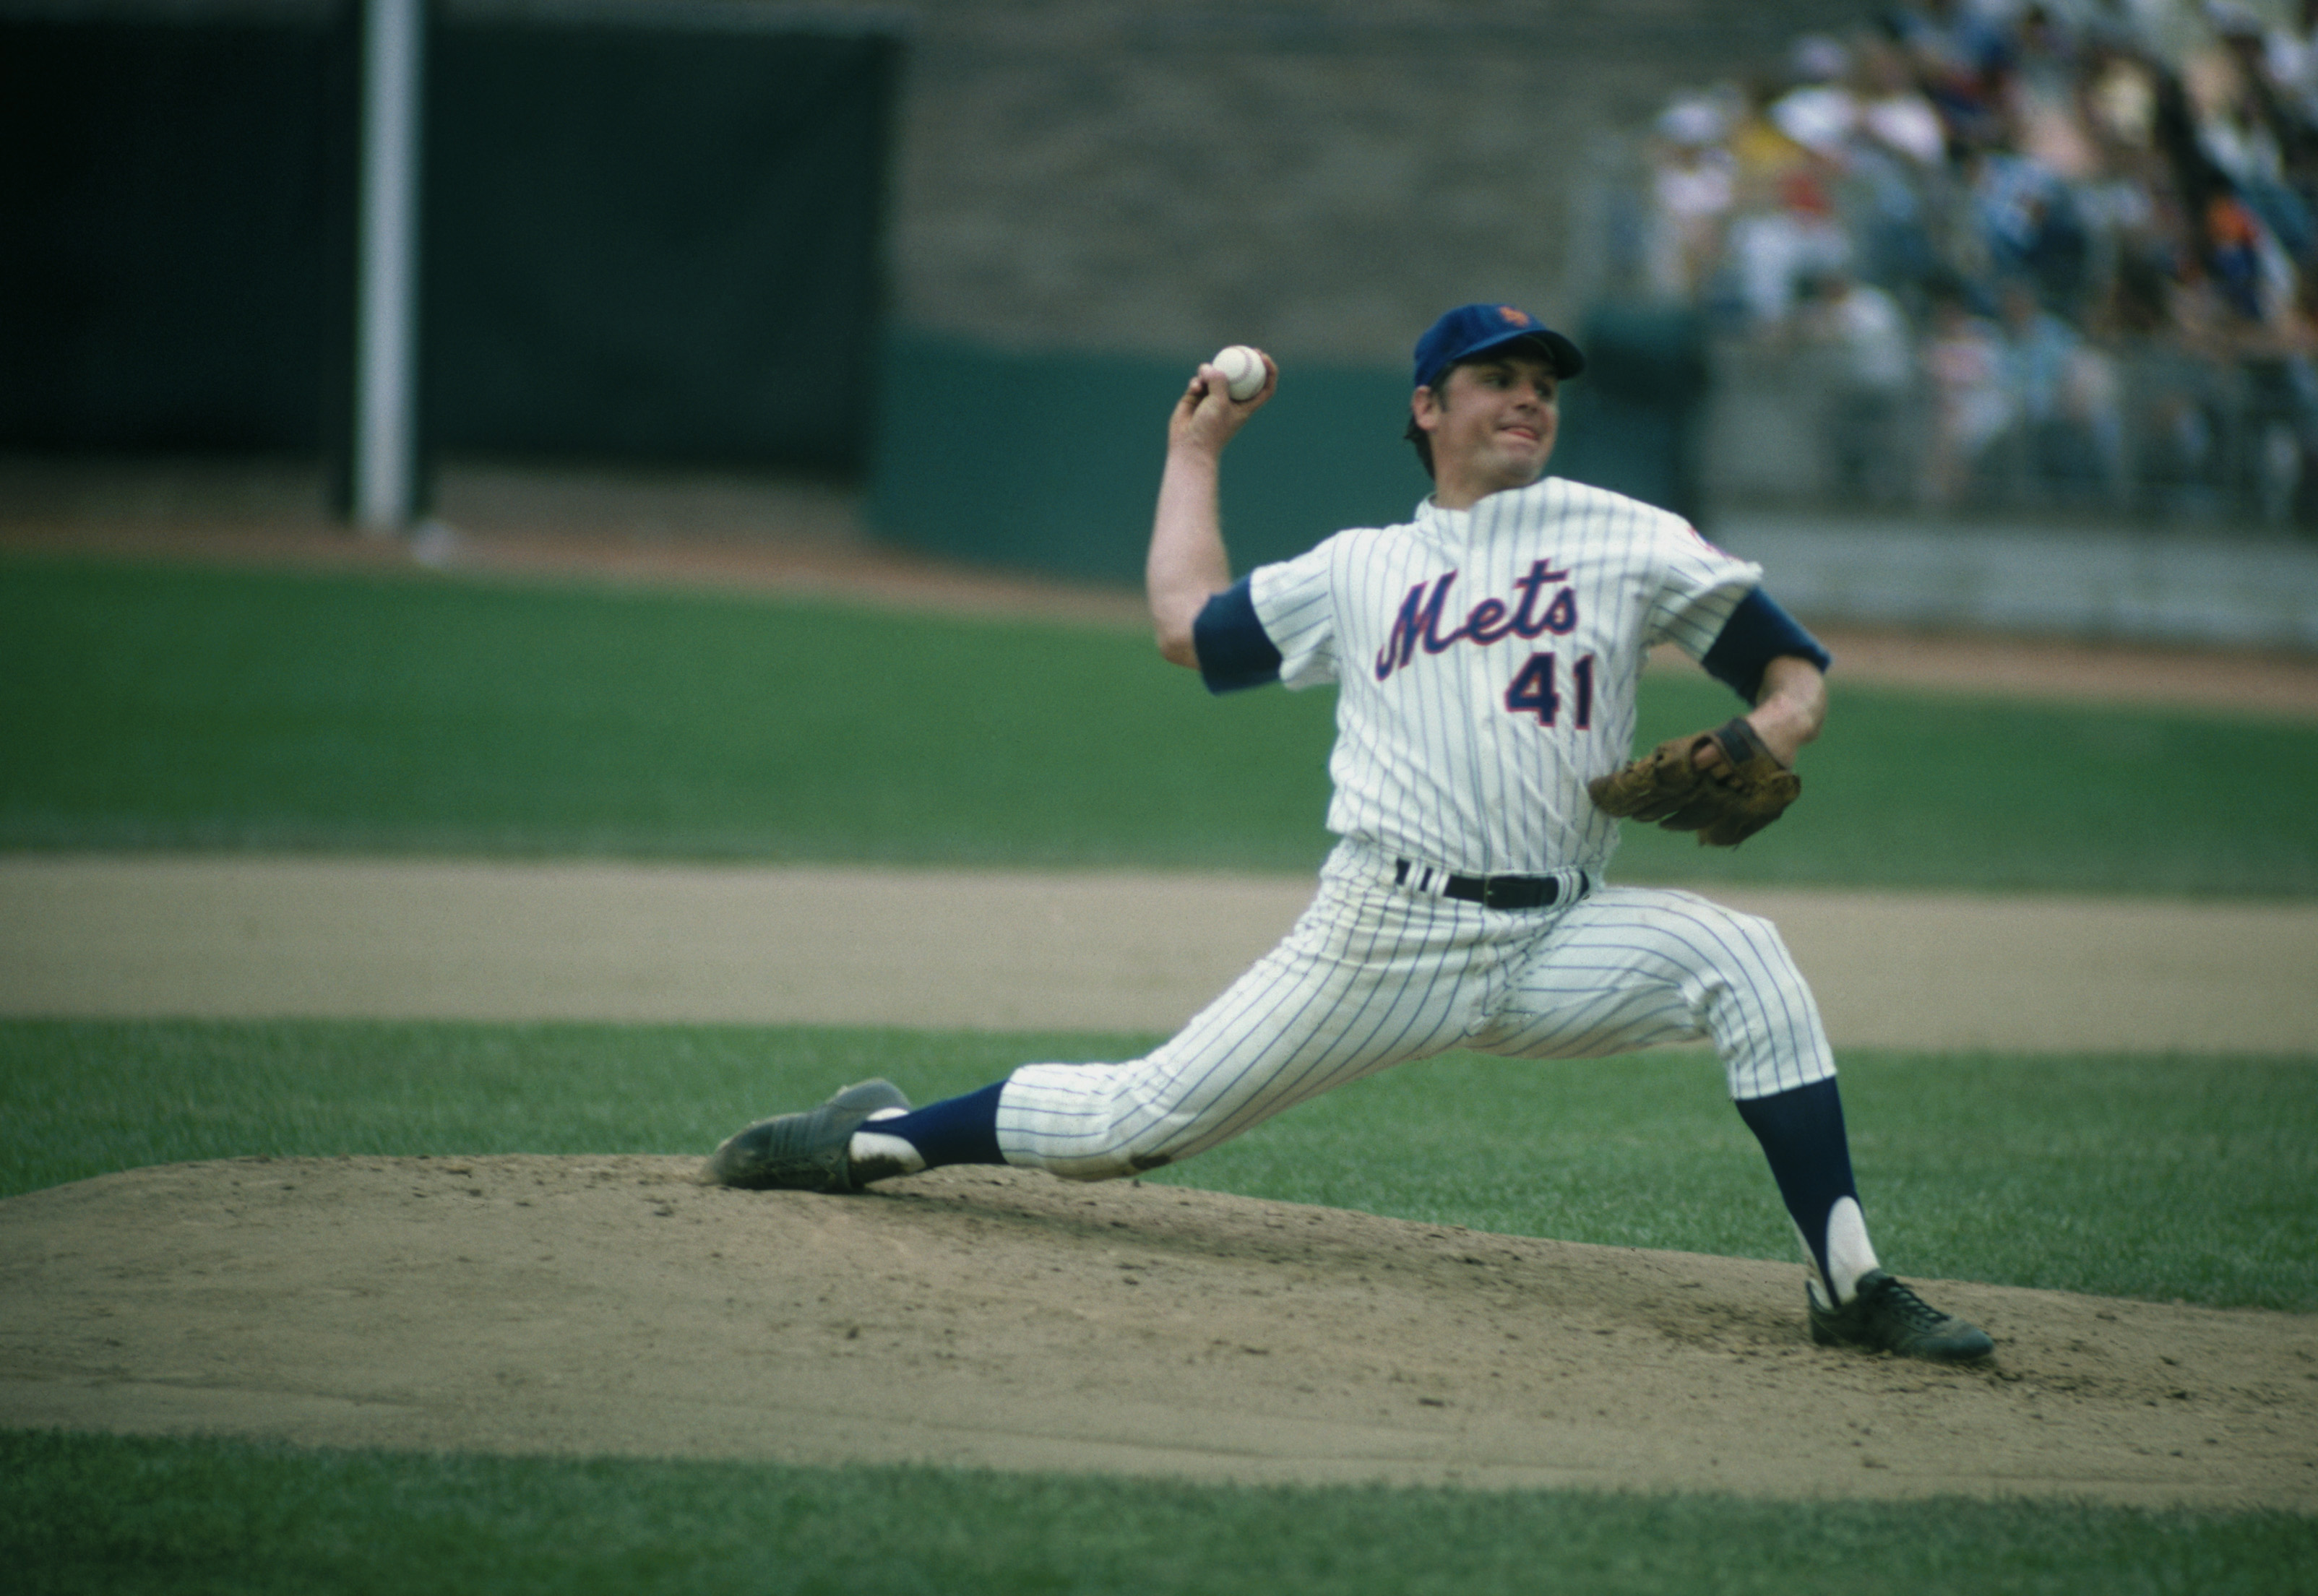 Mets honor Seaver with salute, jersey and dirt-smudged knee